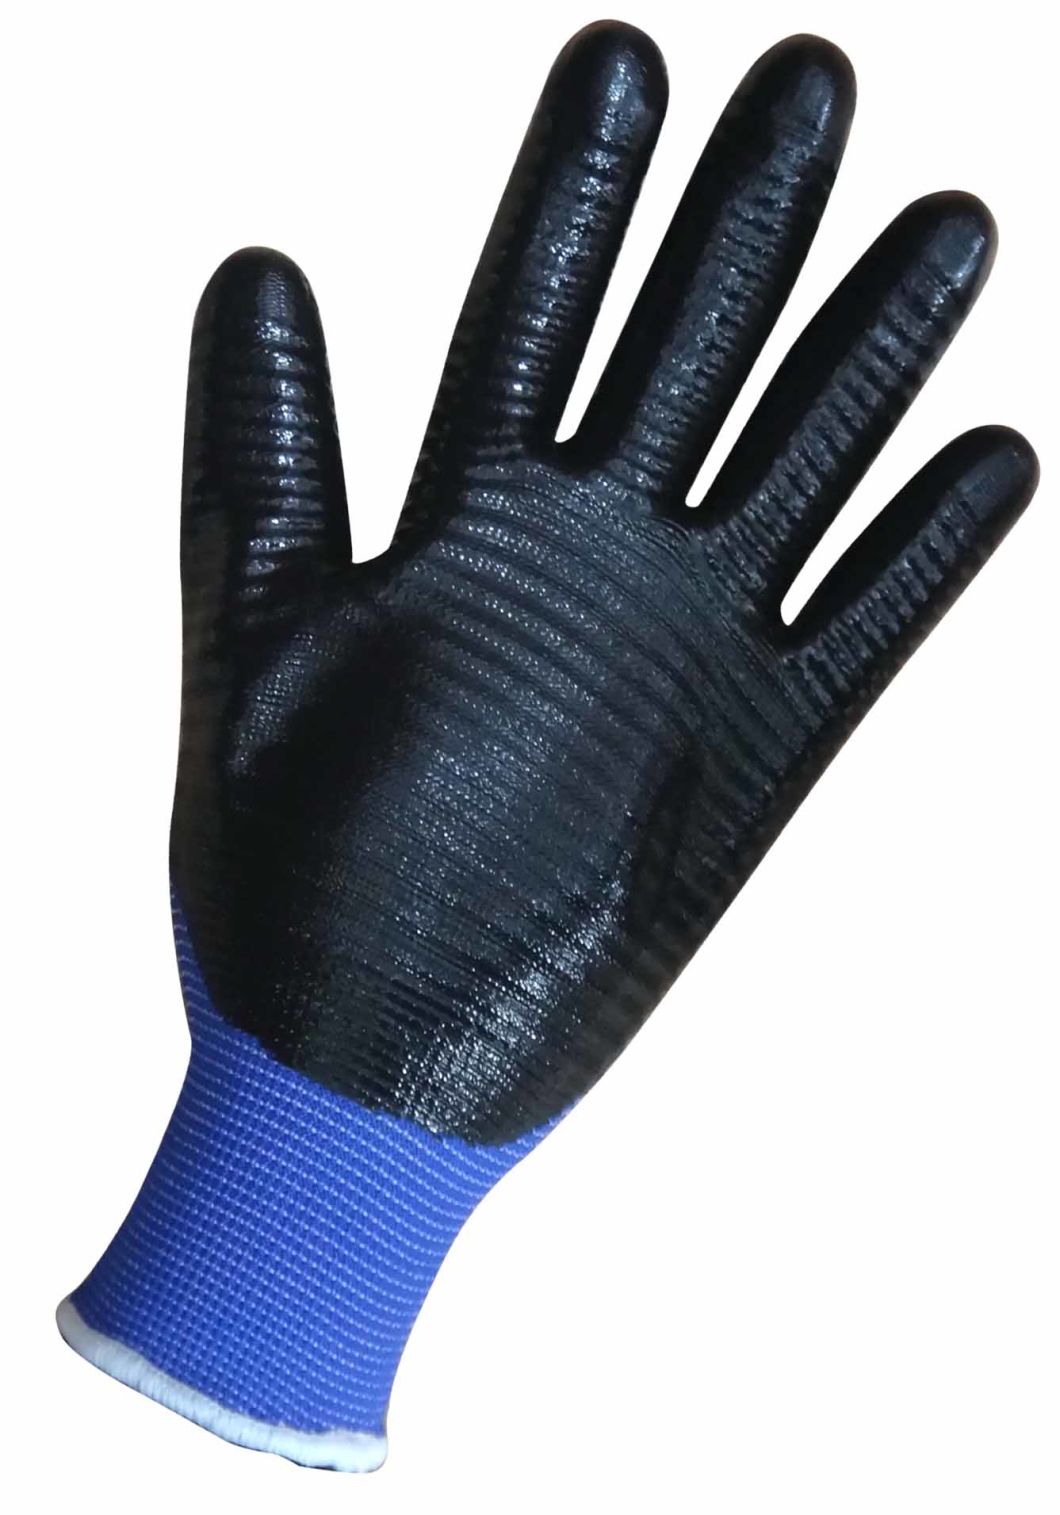 Black Nitrile Coated Puncture Resistant Work Garden Household Cleaning Mechanic Hand Protection Gloves